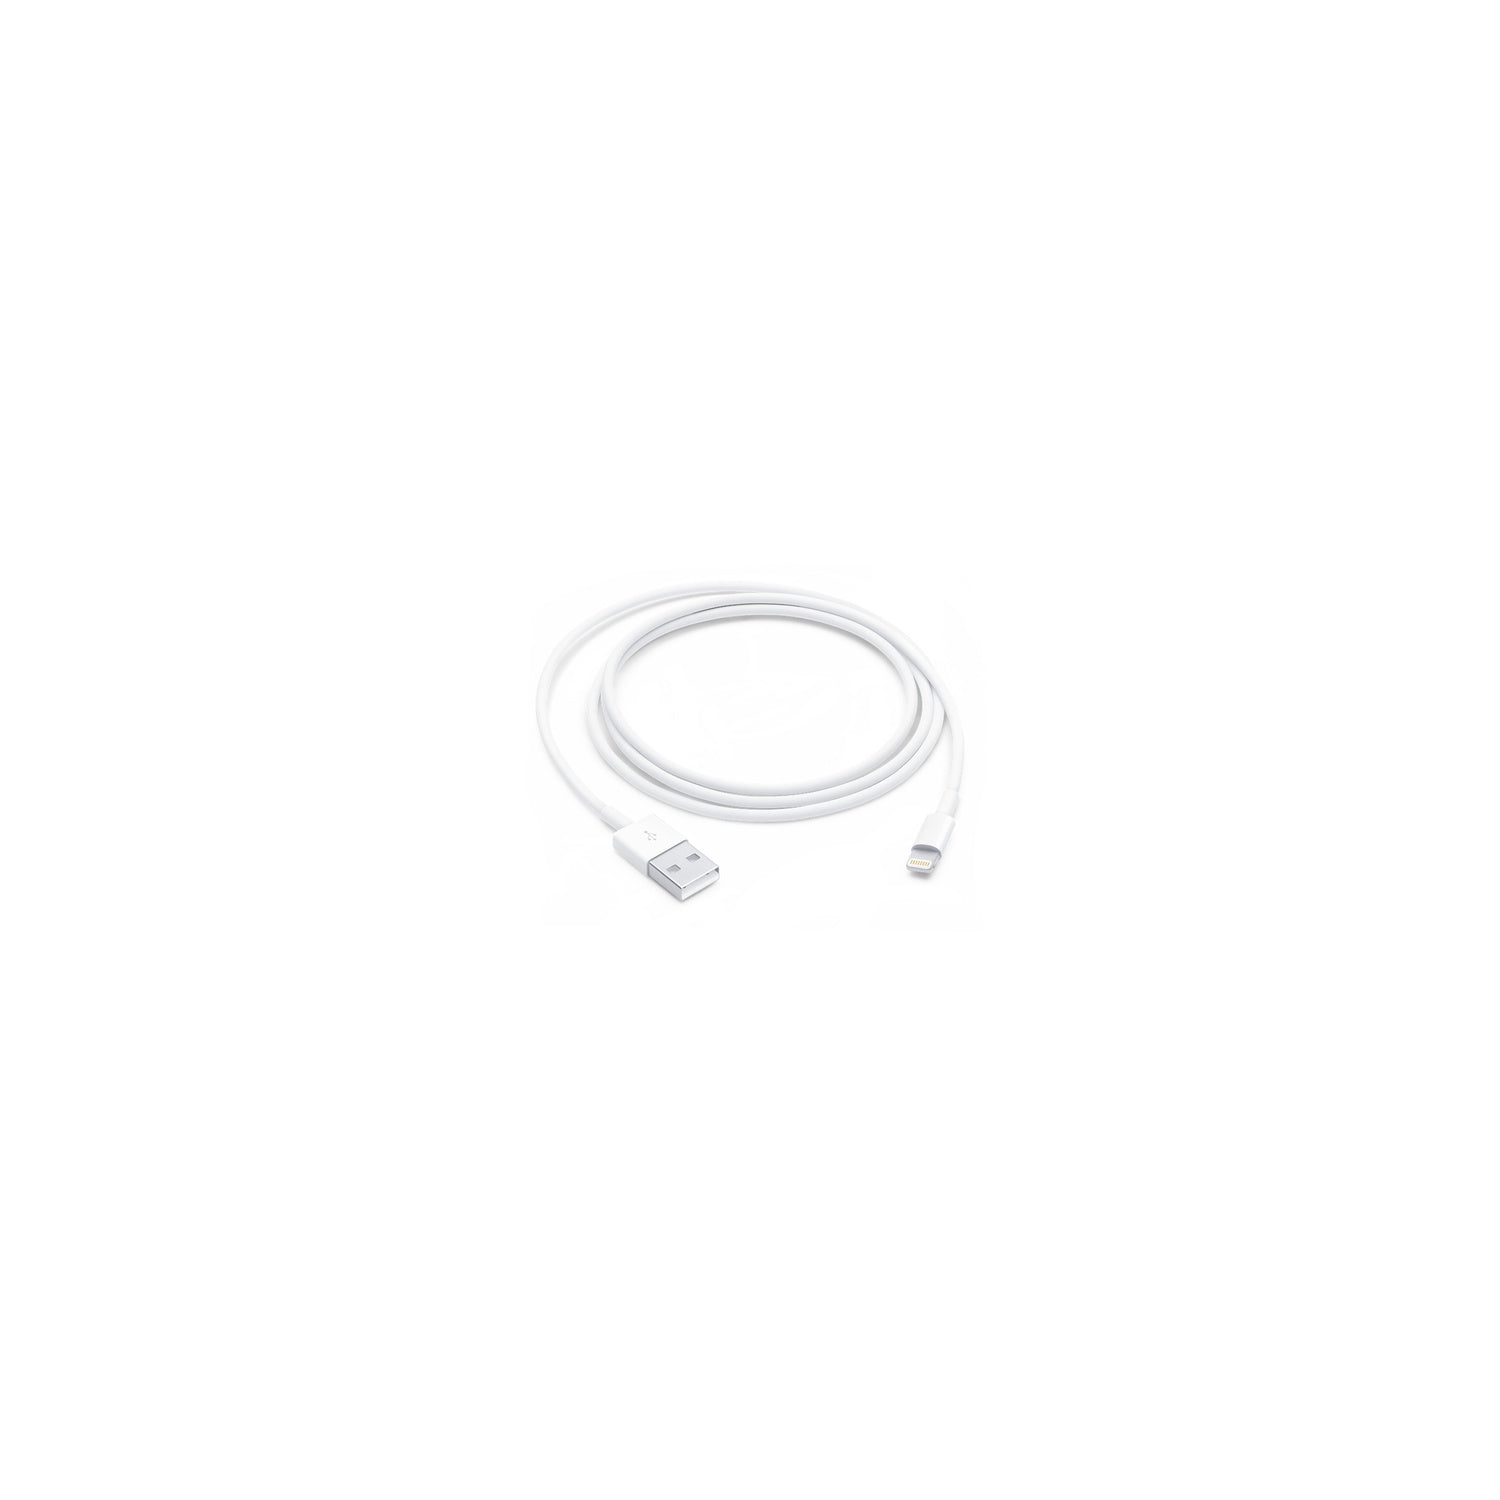 Open Box - Apple MXLY2AM/A Lightning to USB Cable 1m